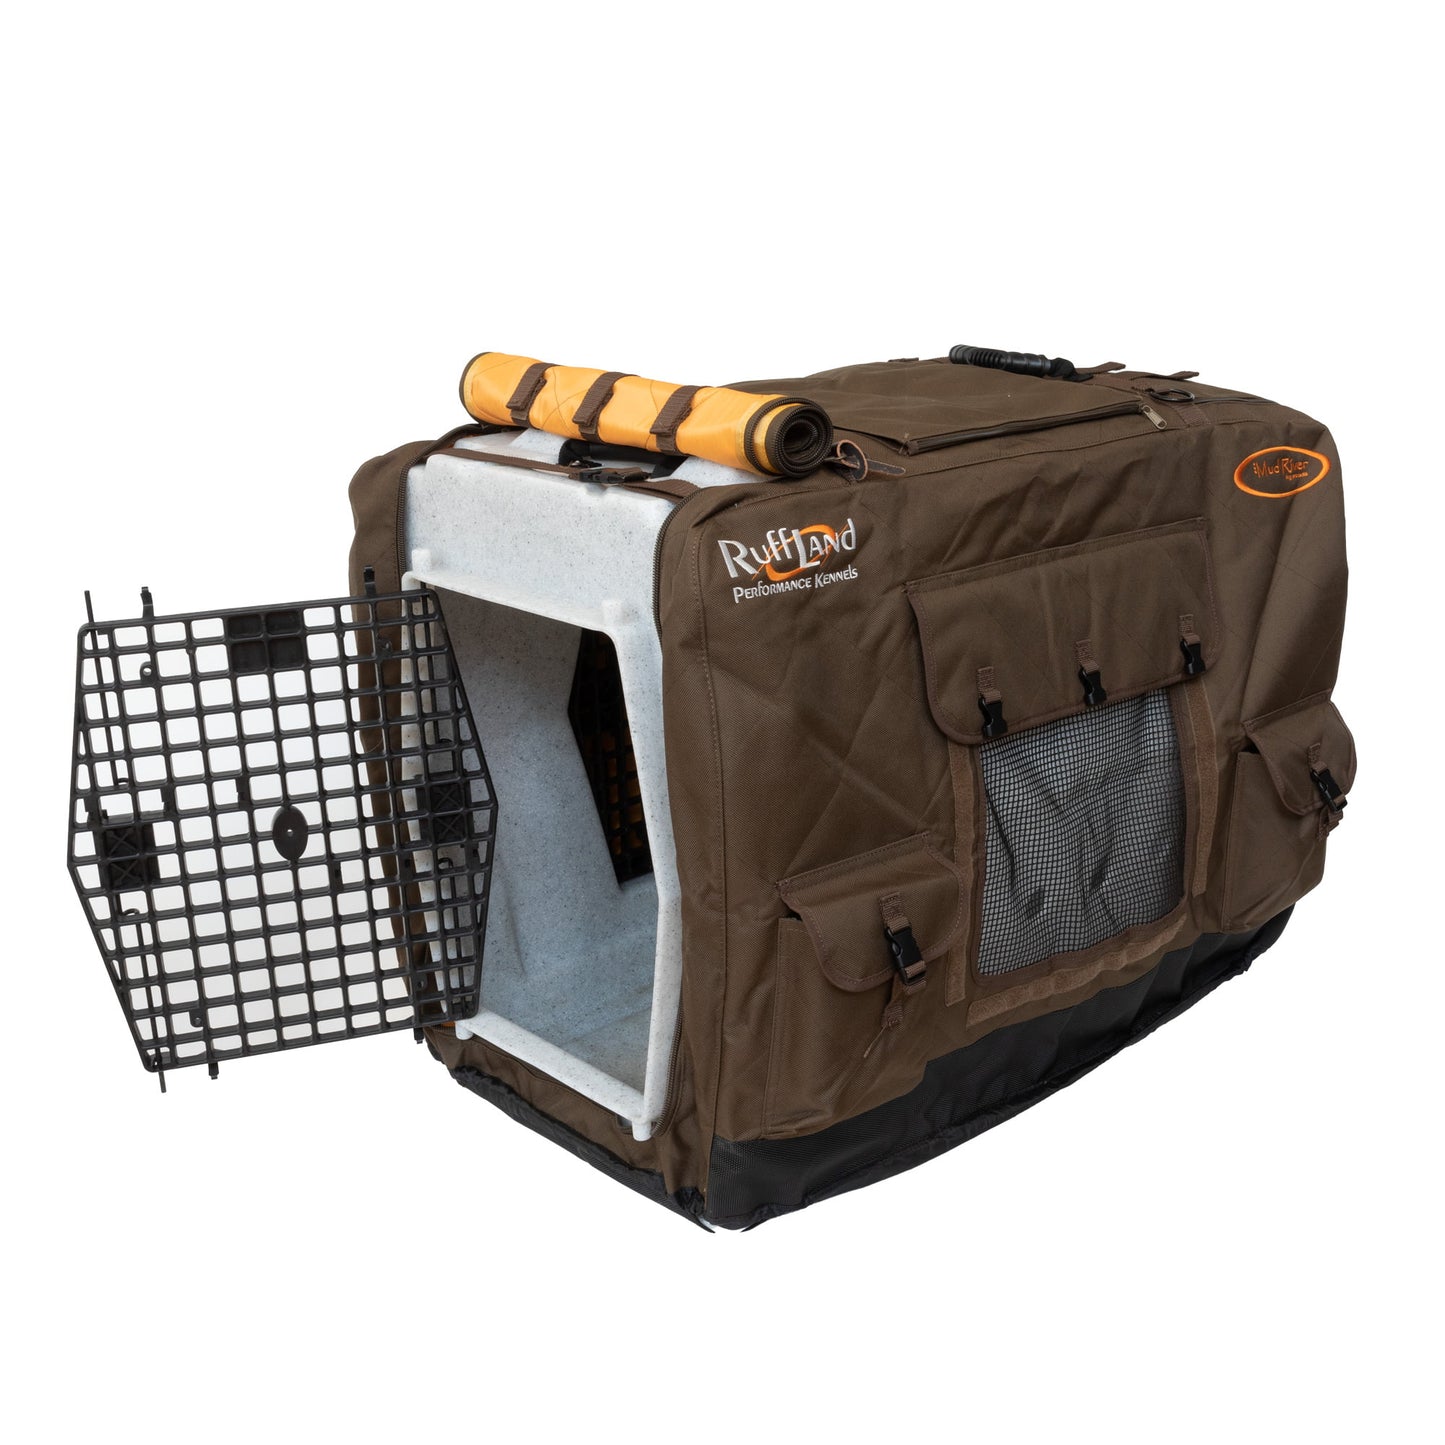 RuffLand - Double Door Insulated Kennel Cover